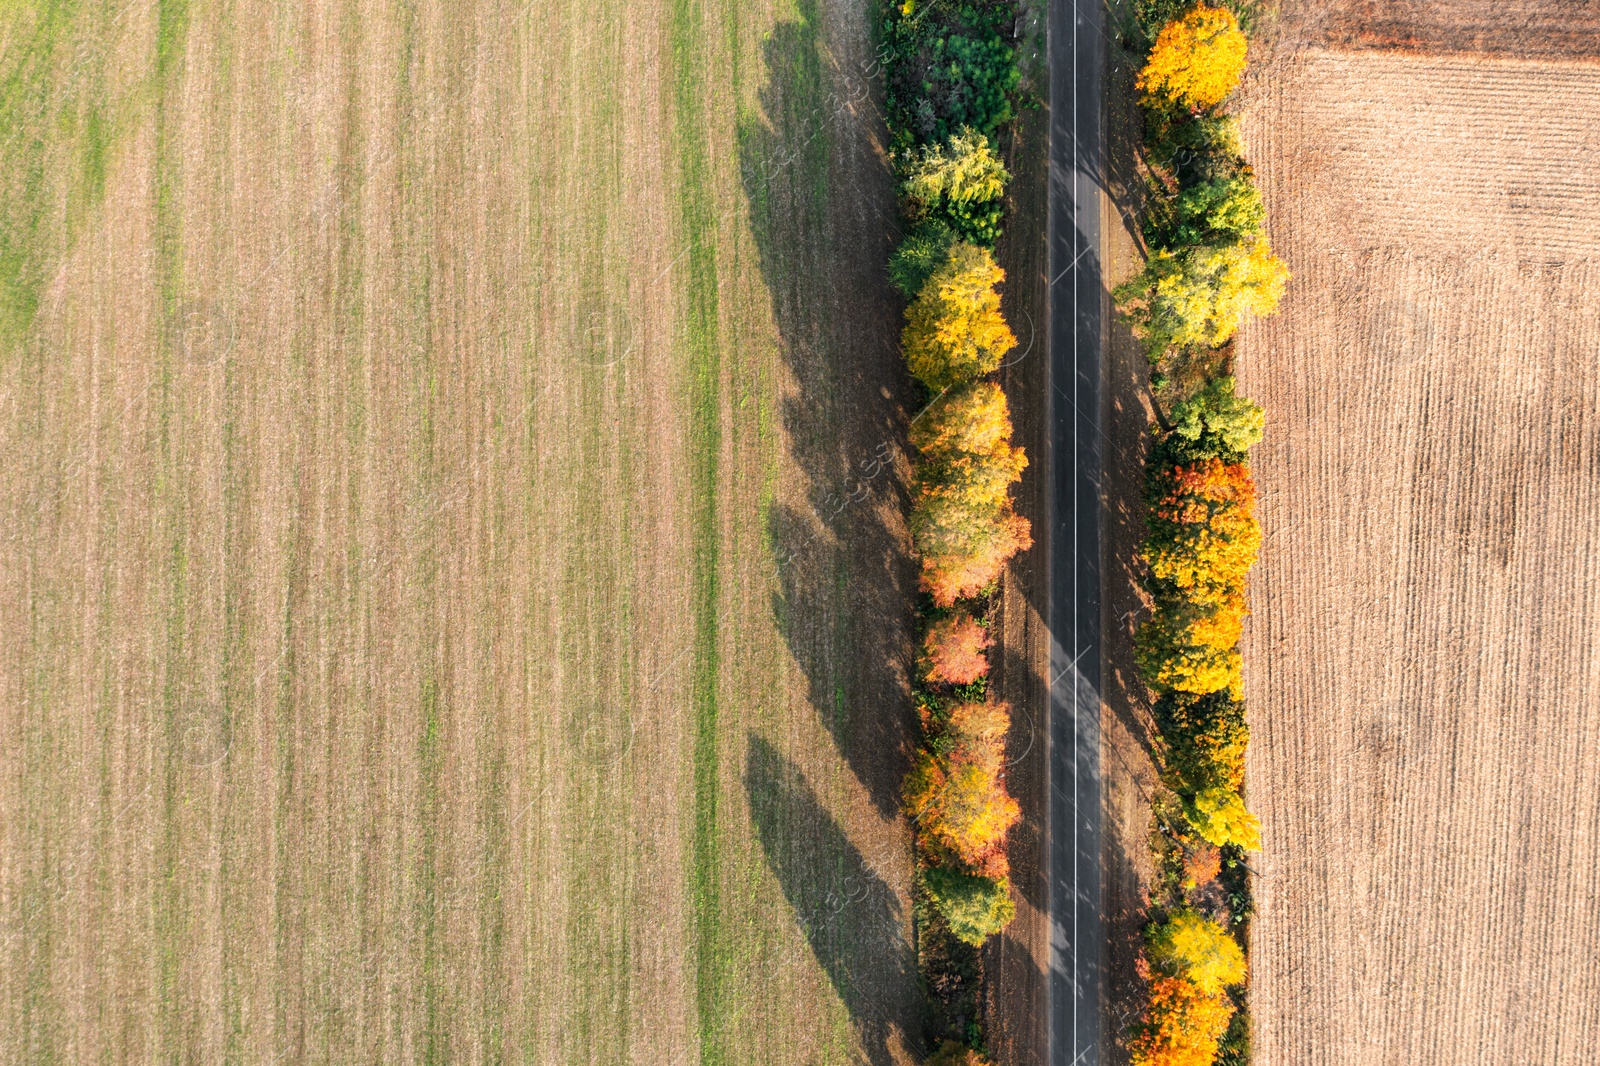 Image of Aerial view of country road surrounded by trees and agricultural fields on autumn day